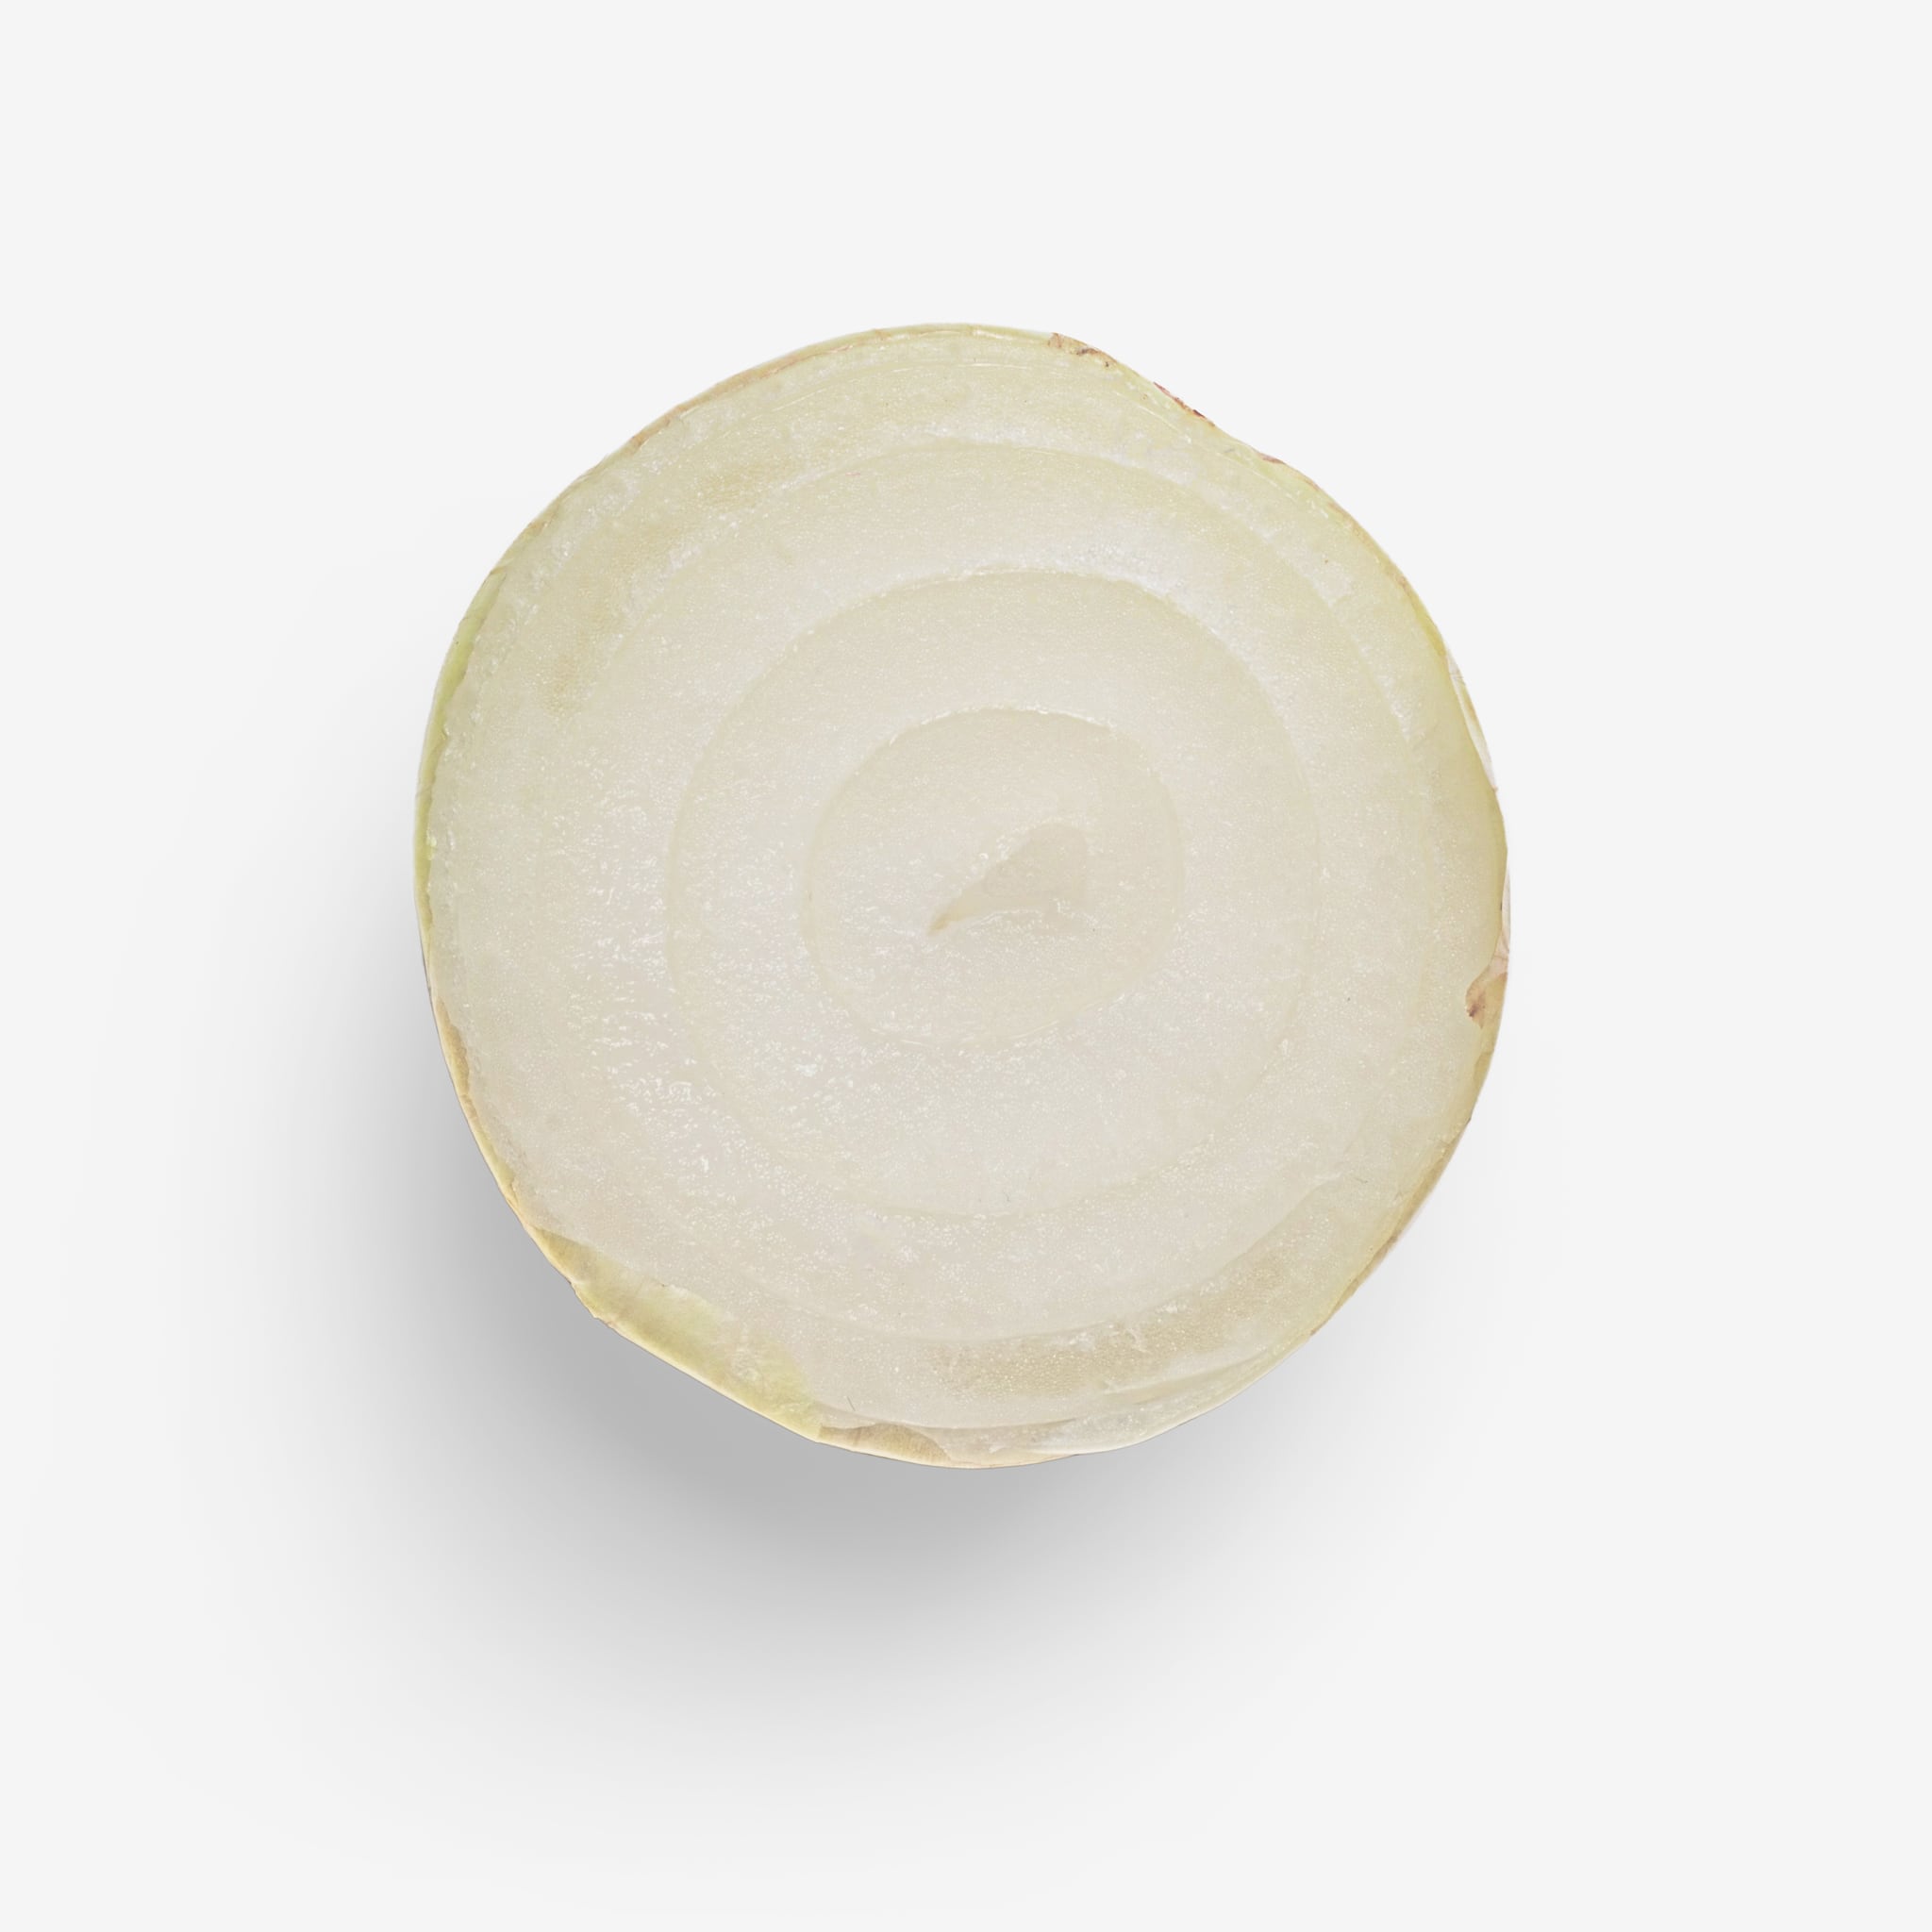 Onion PSD image with transparent background